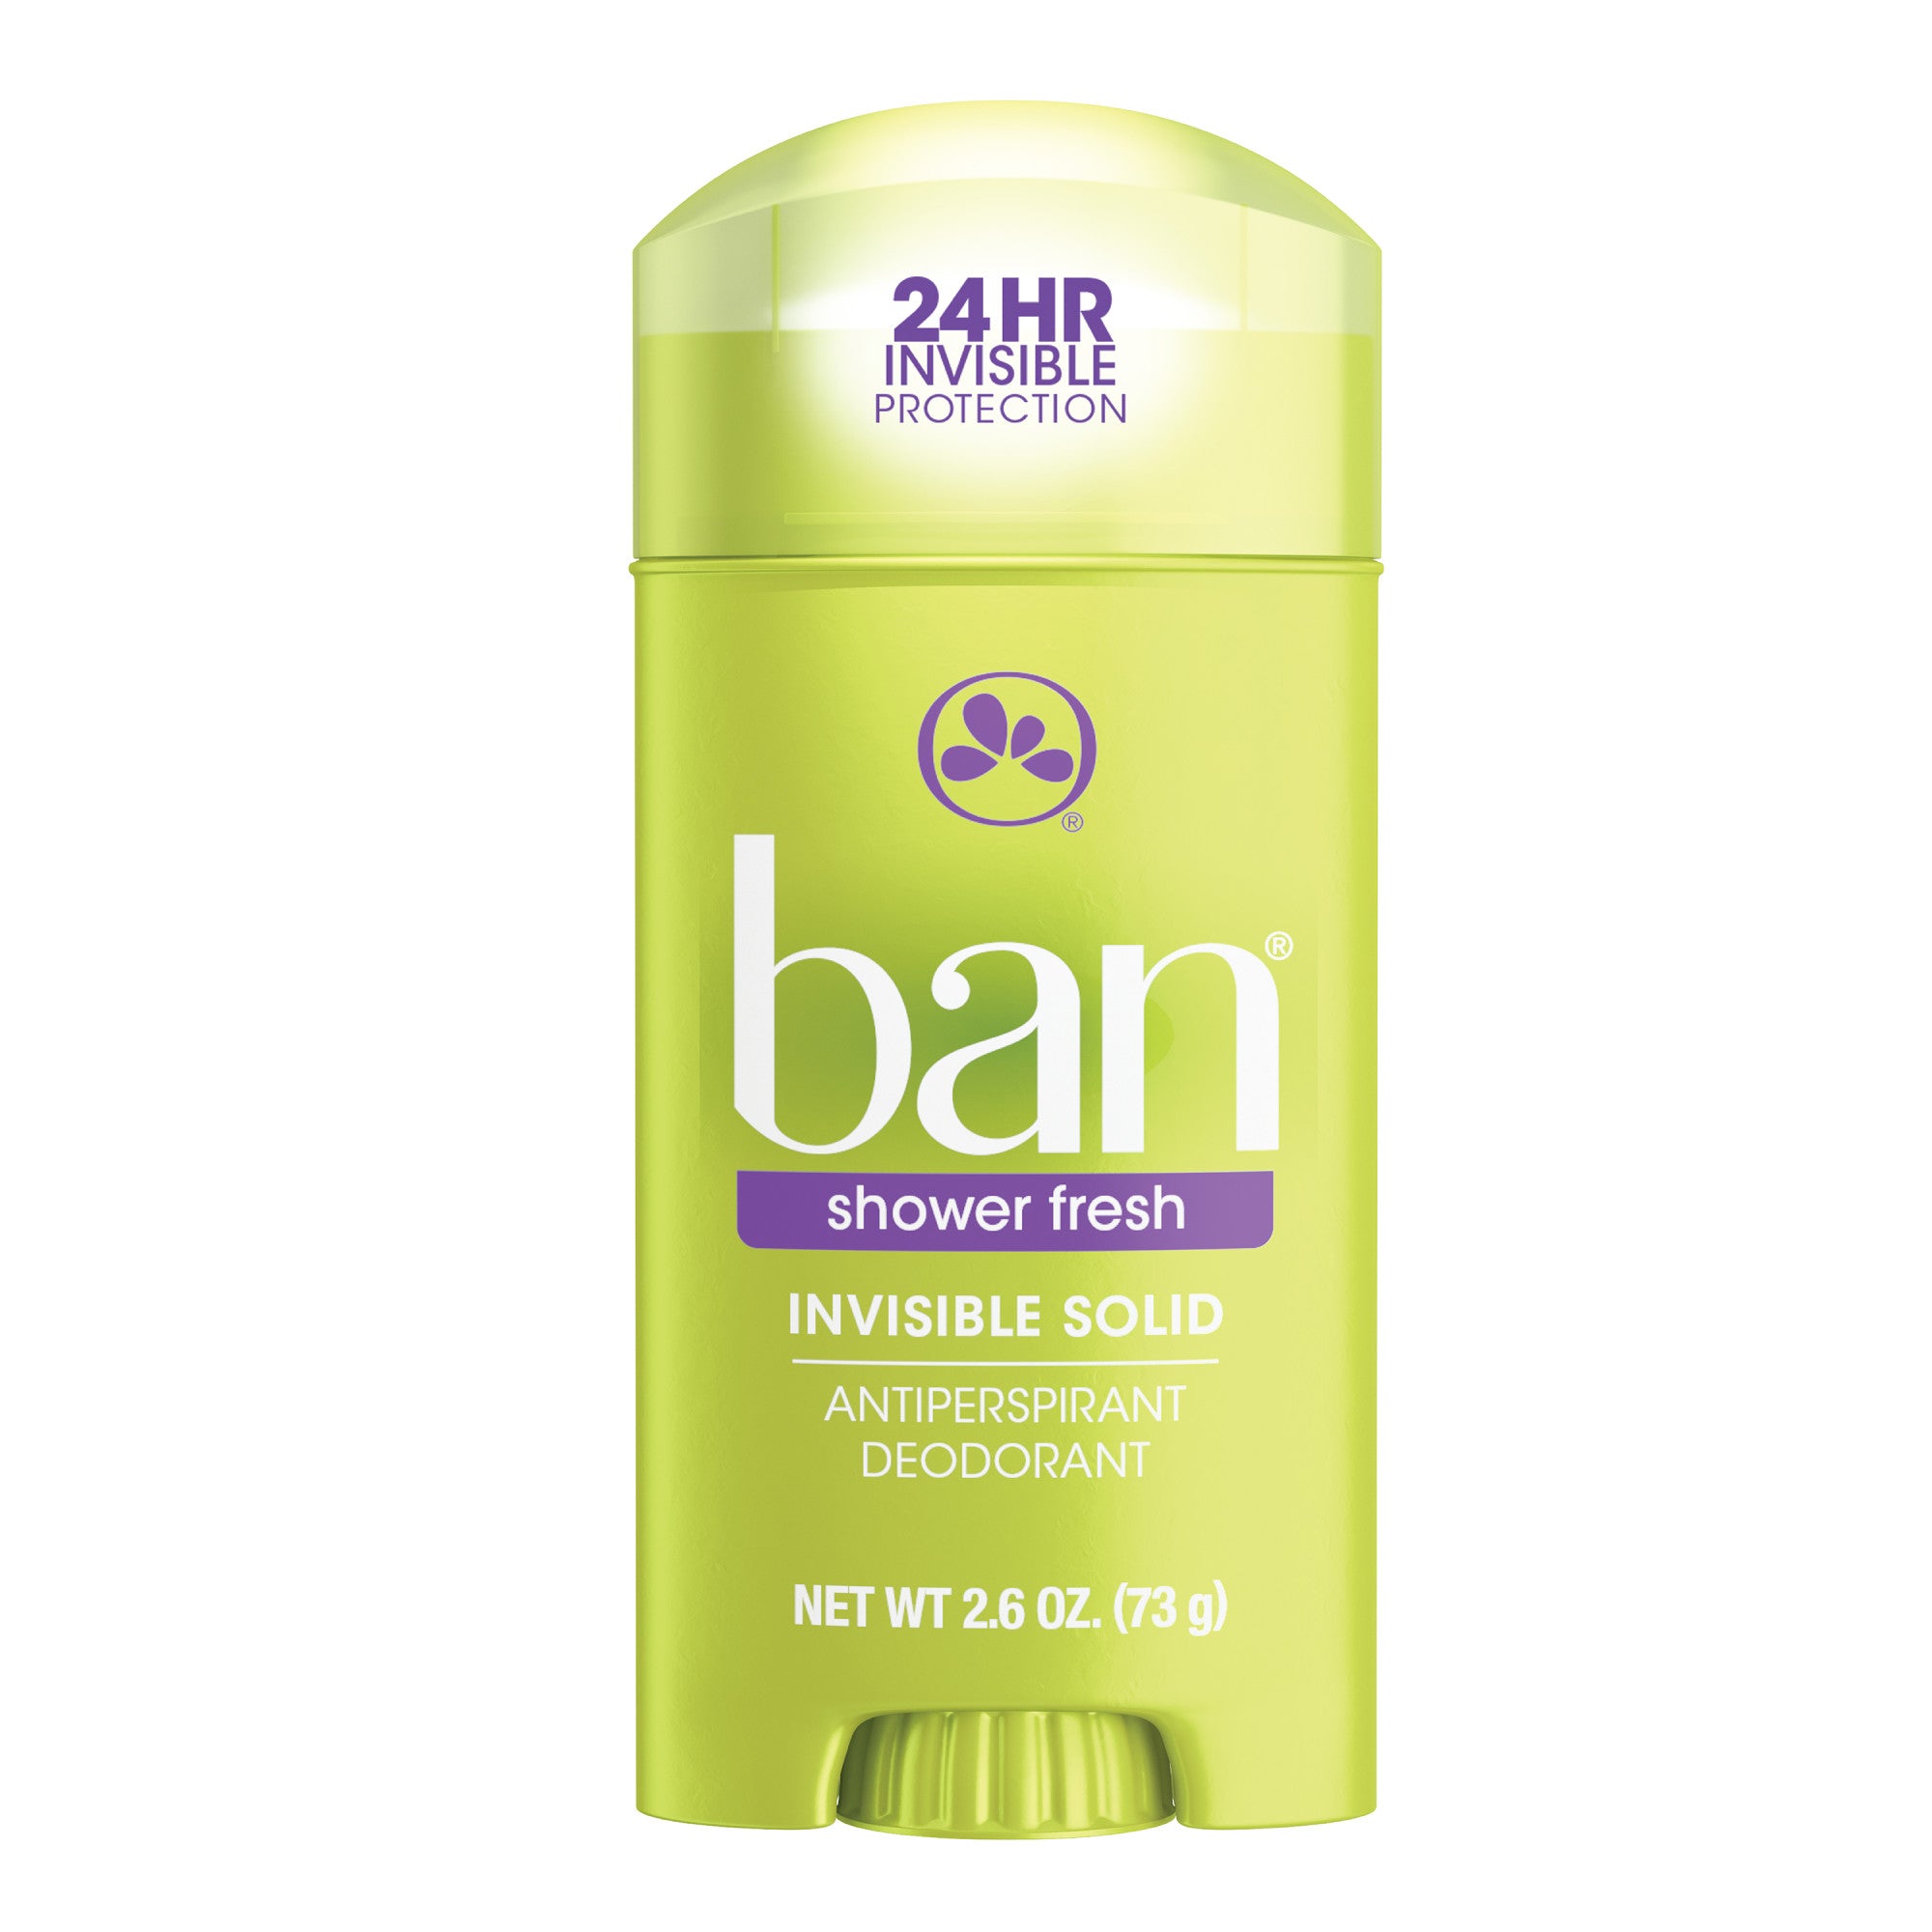 Ban Invisible Solid Shower Fresh, 2.6 OZ